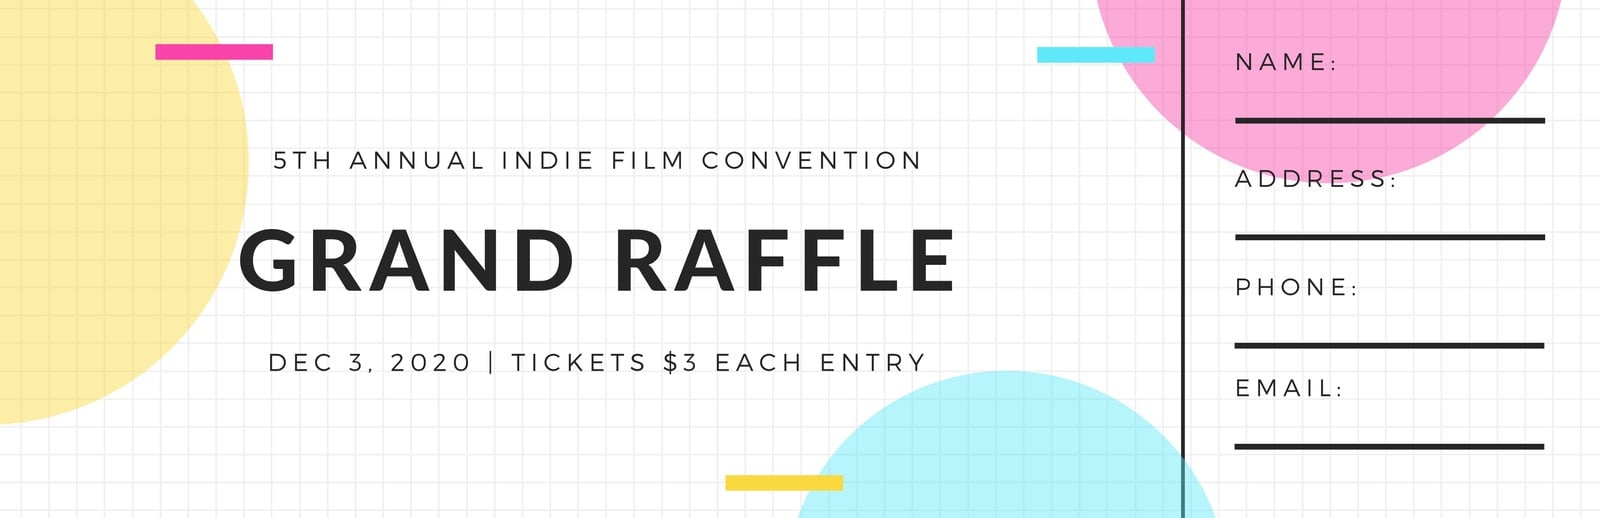 raffle tickets pictures